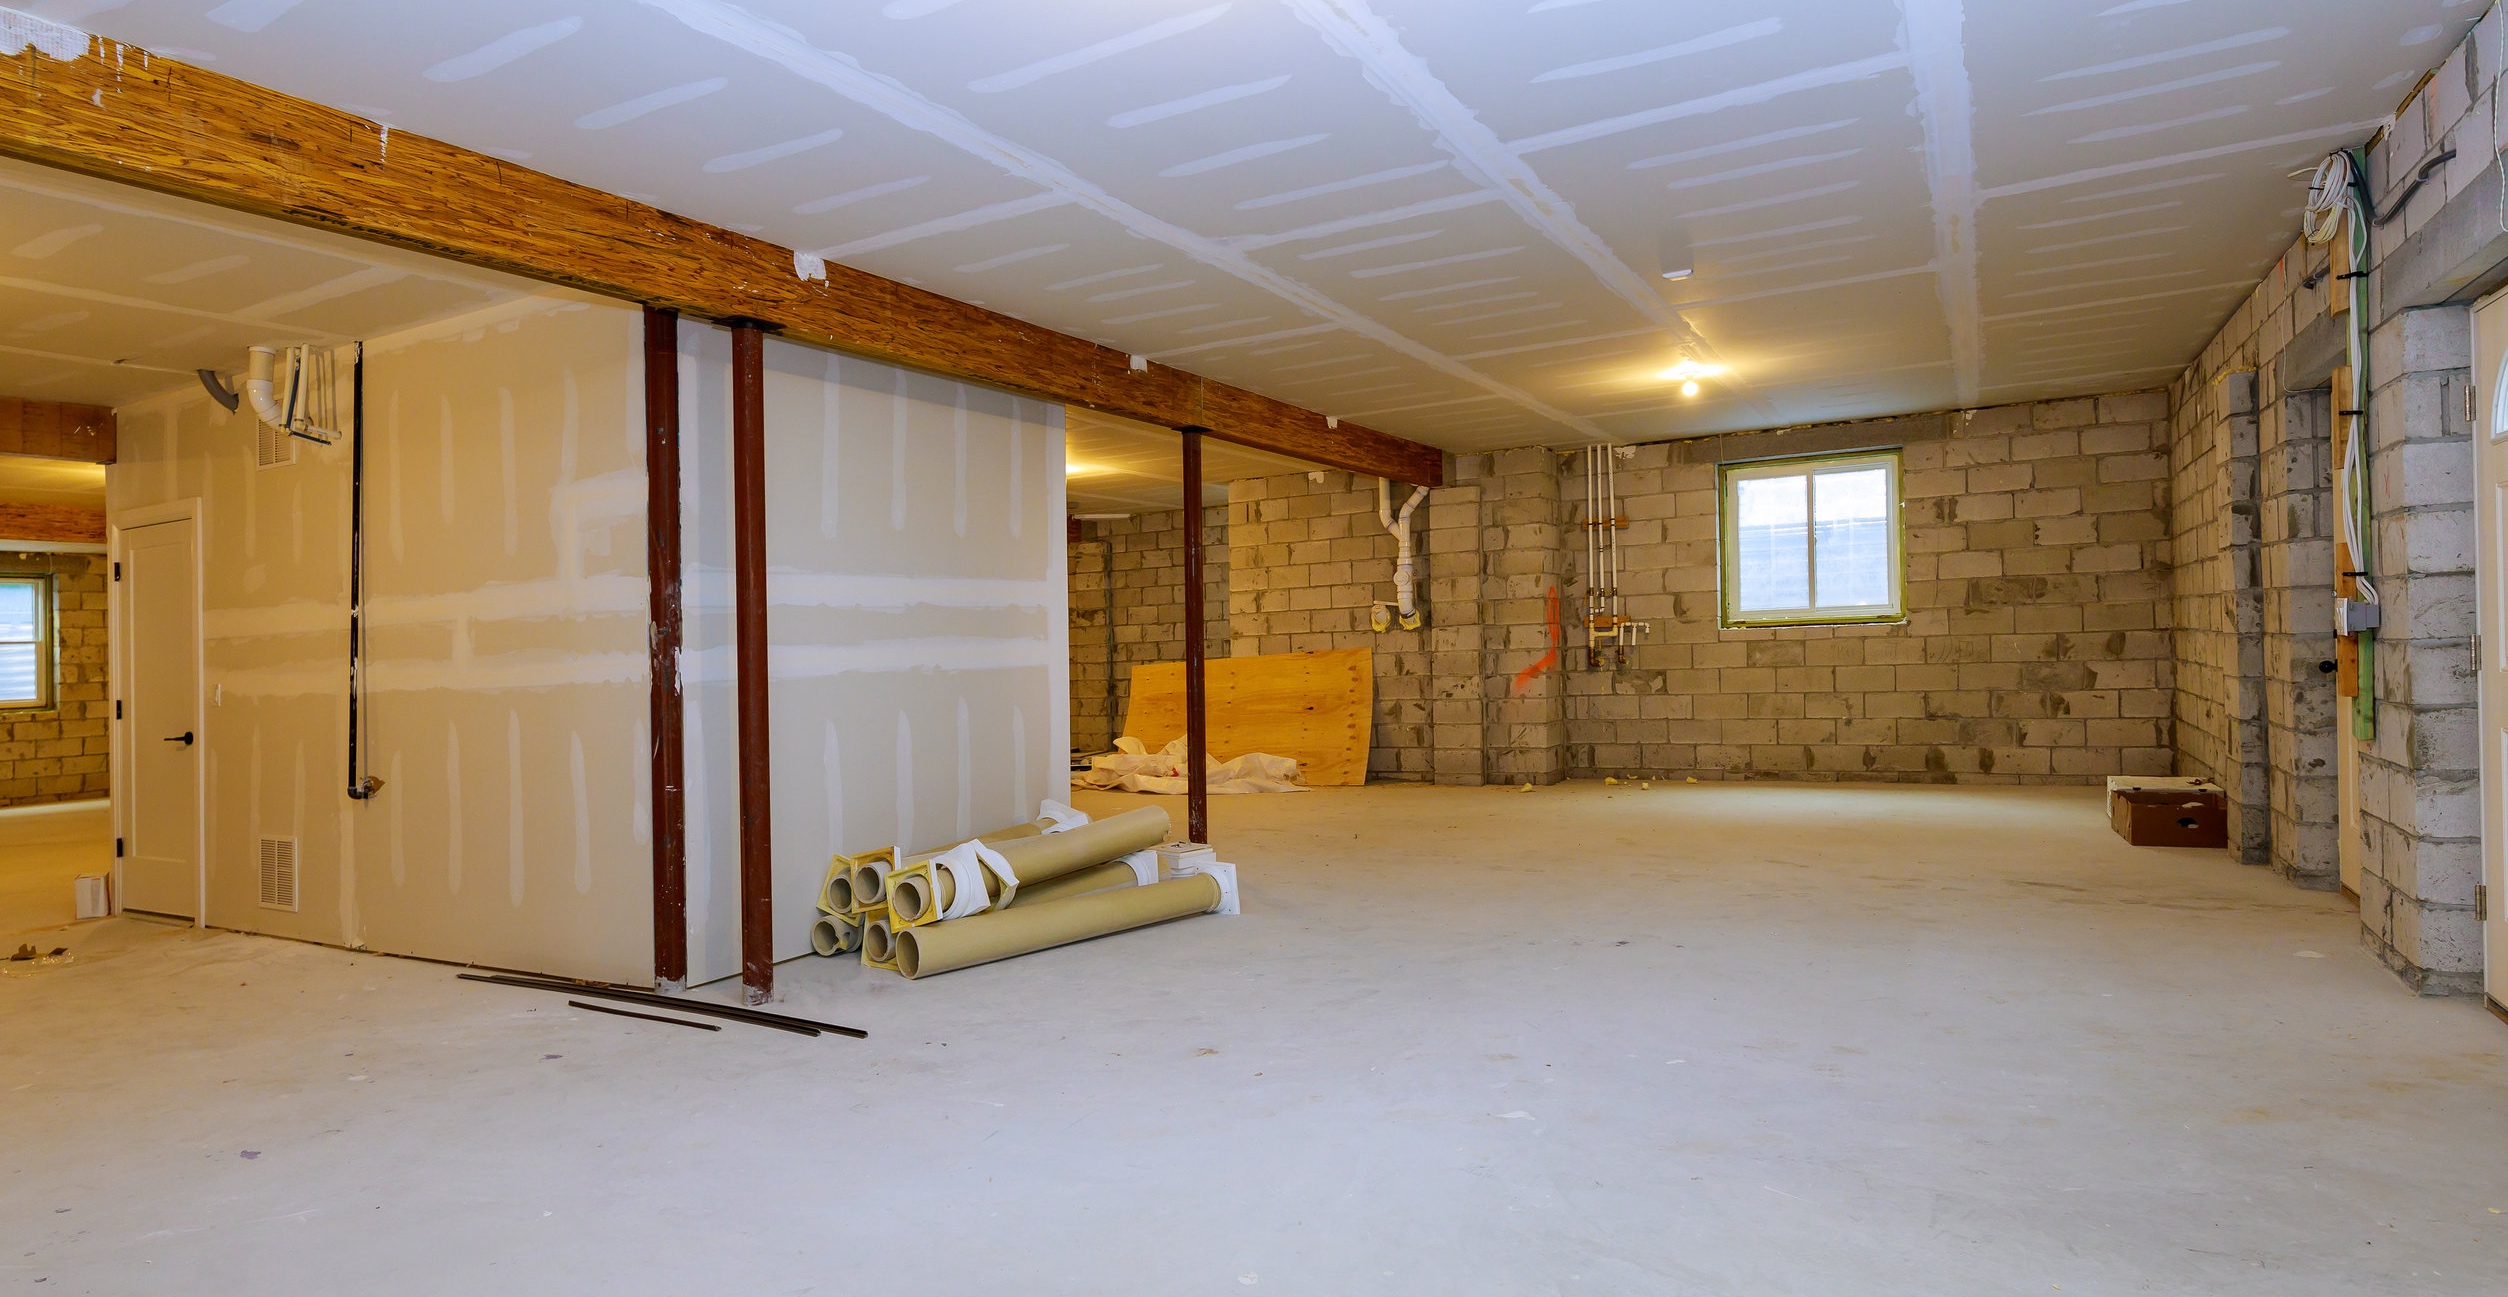 View of the inside of a residential basement